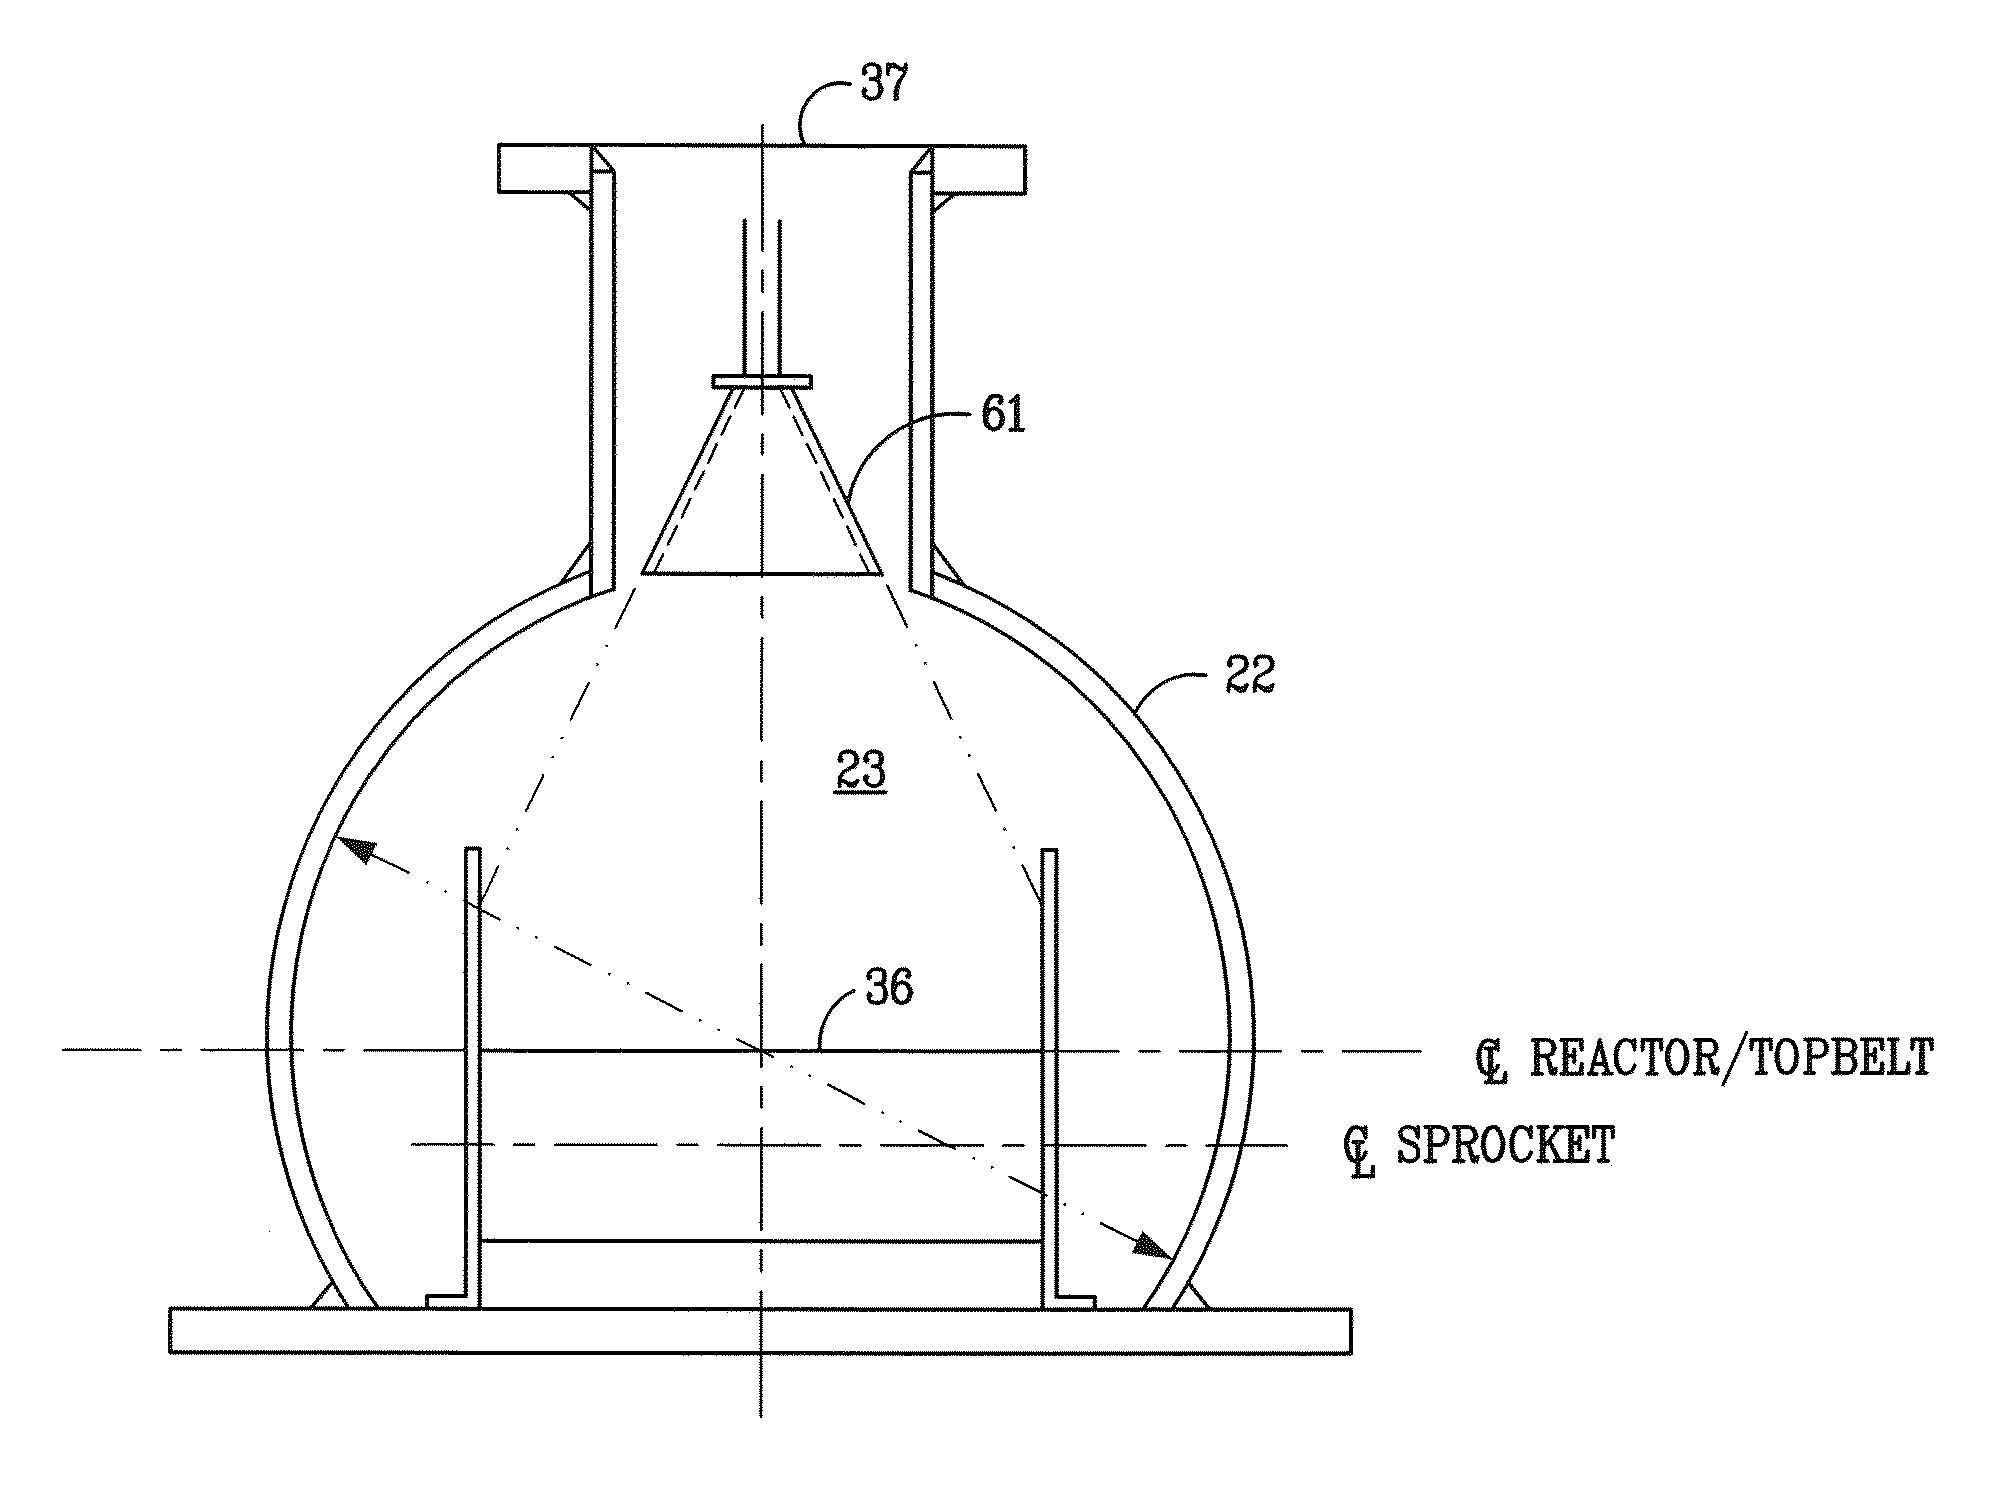 Microwave-based conveying devices and processing of carbonaceous materials